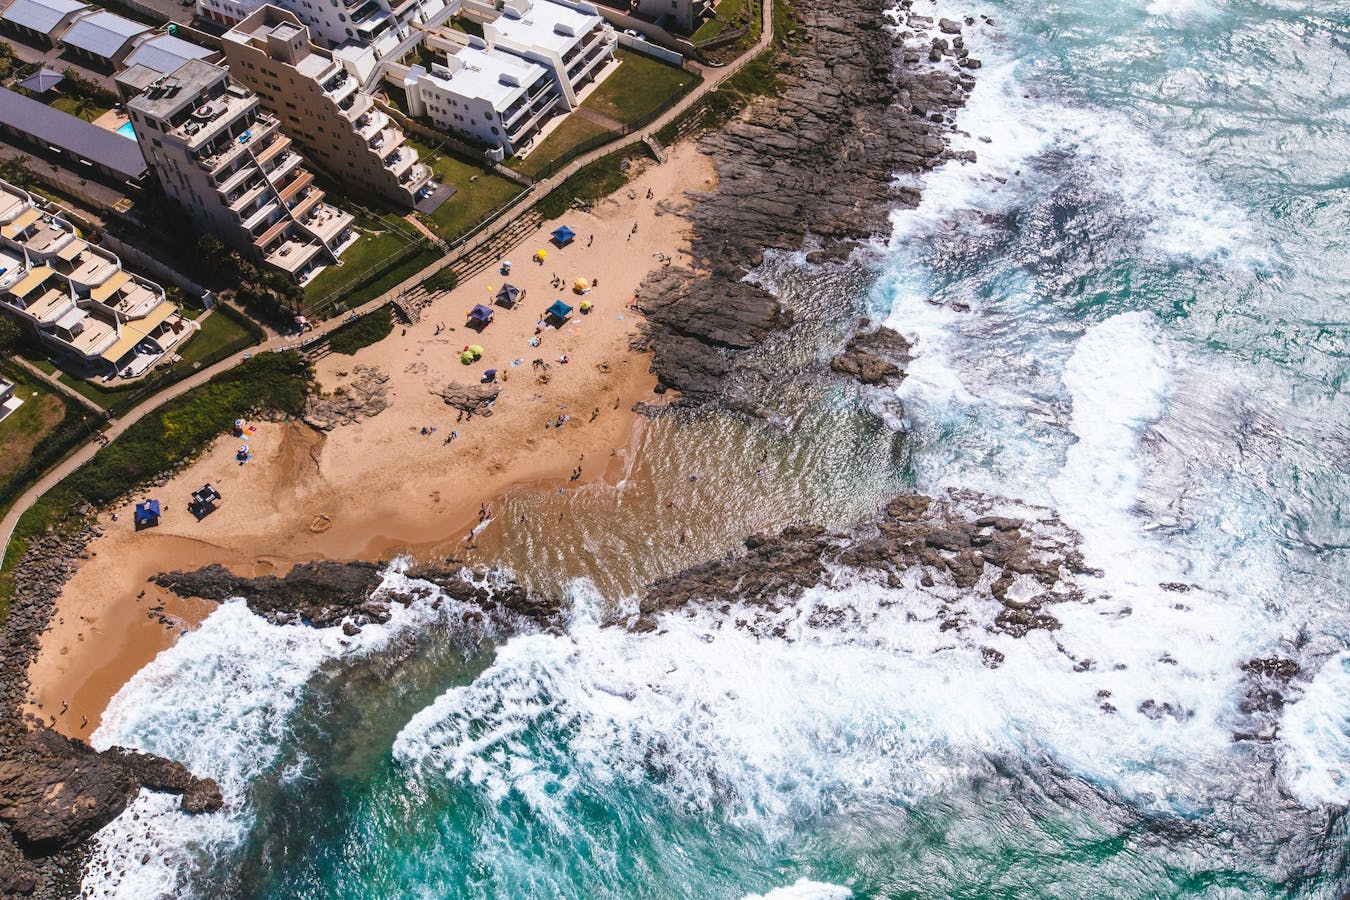 Drone shot of the beach in Durban, South Africa